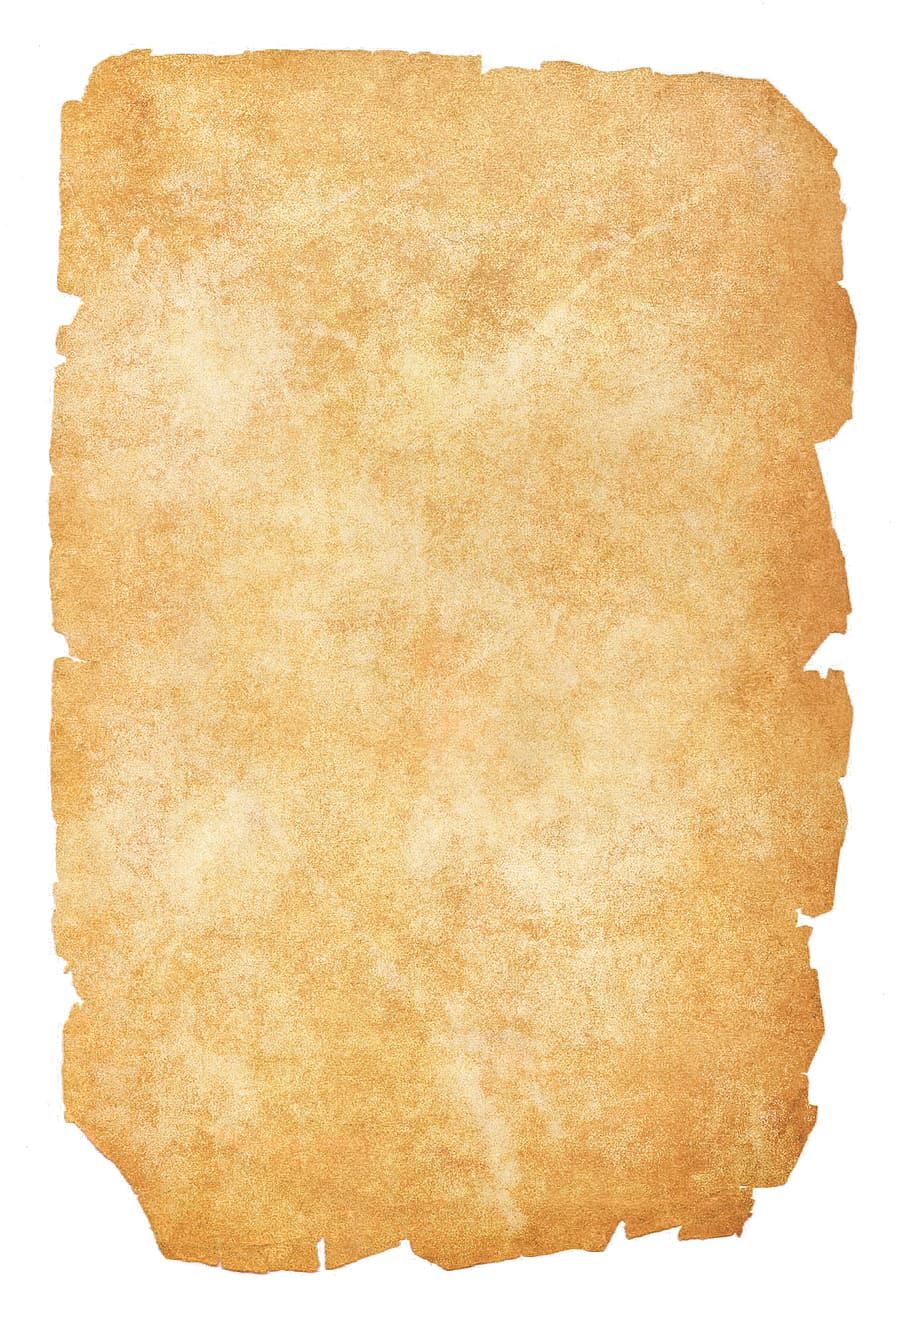 aged, background, closeup, isolated, paper, texture, textured, white, empty, clear